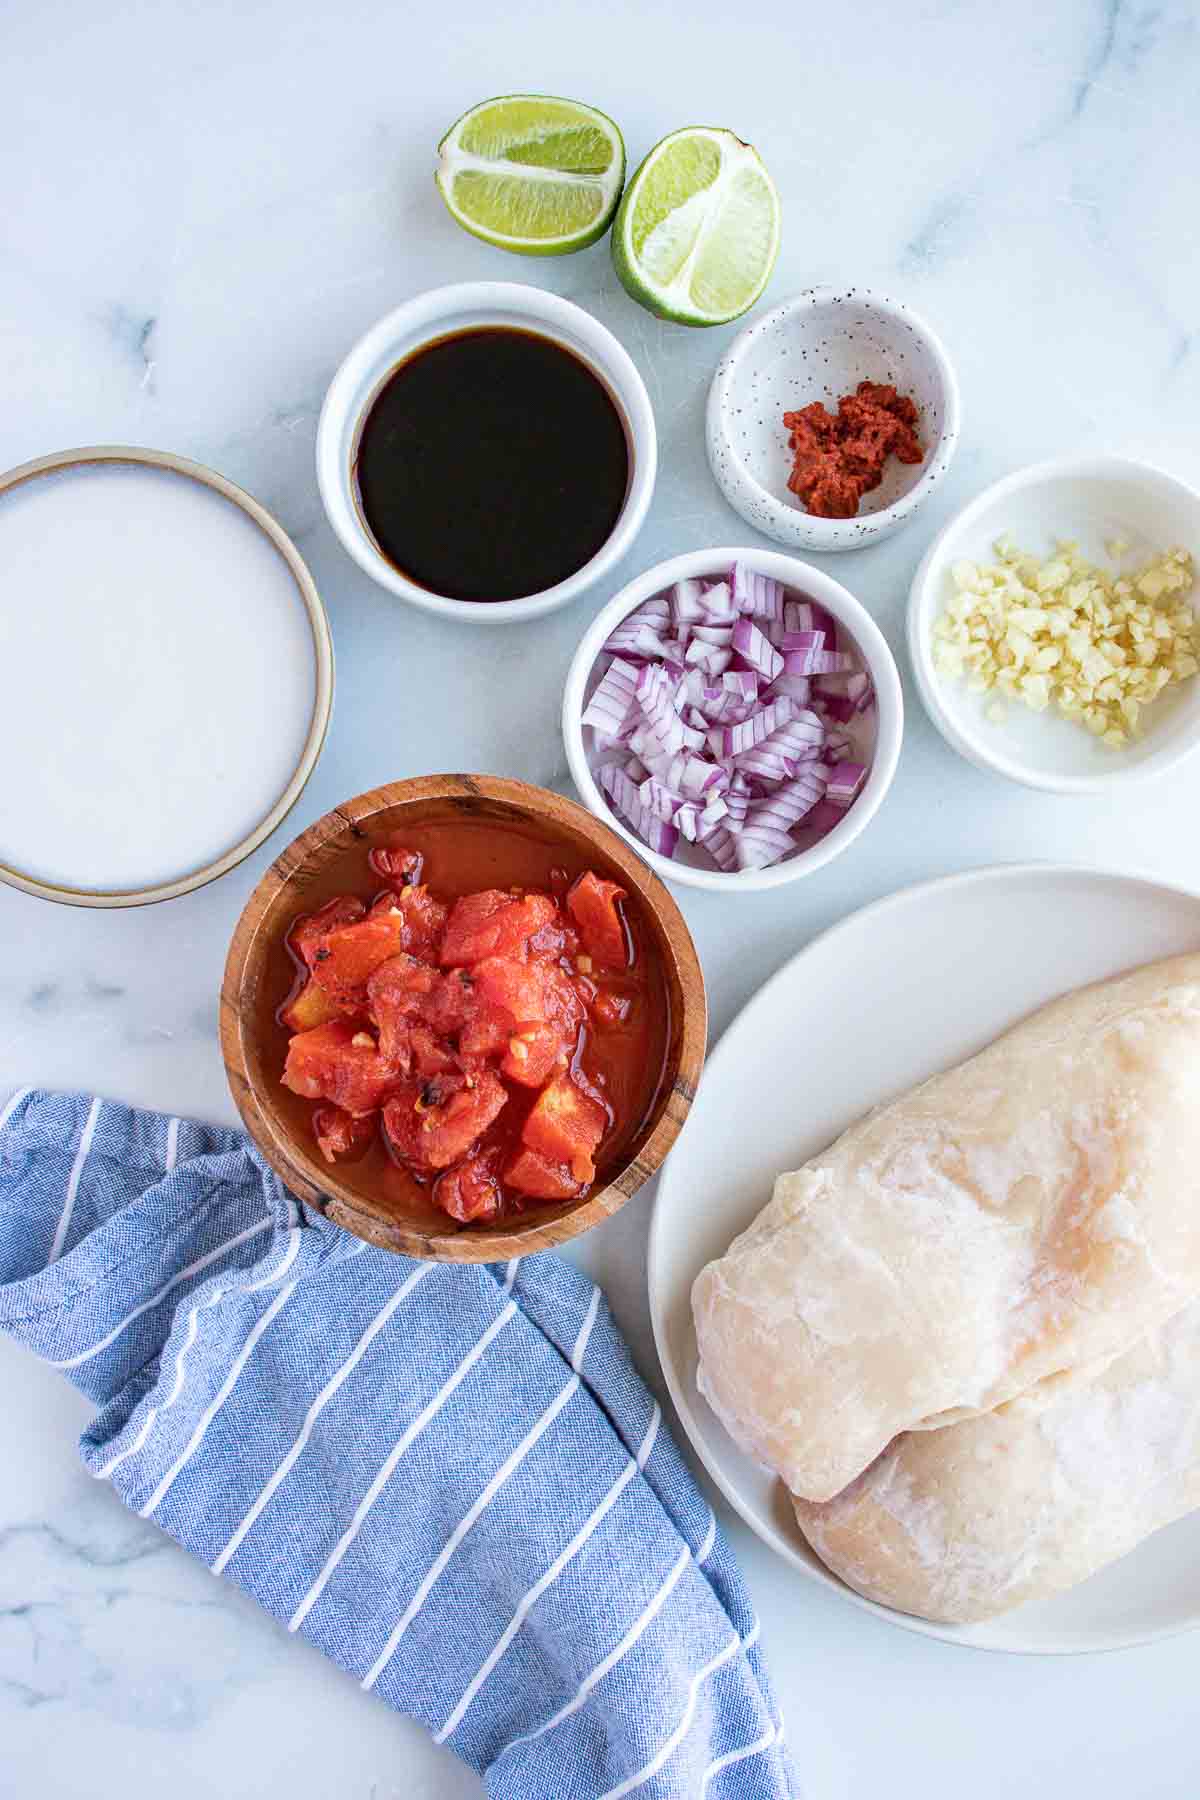 Ingredients for Thai Chicken: Chicken breasts, coconut milk, lime juice, curry paste, soy sauce, fire roasted tomatoes, and red onion